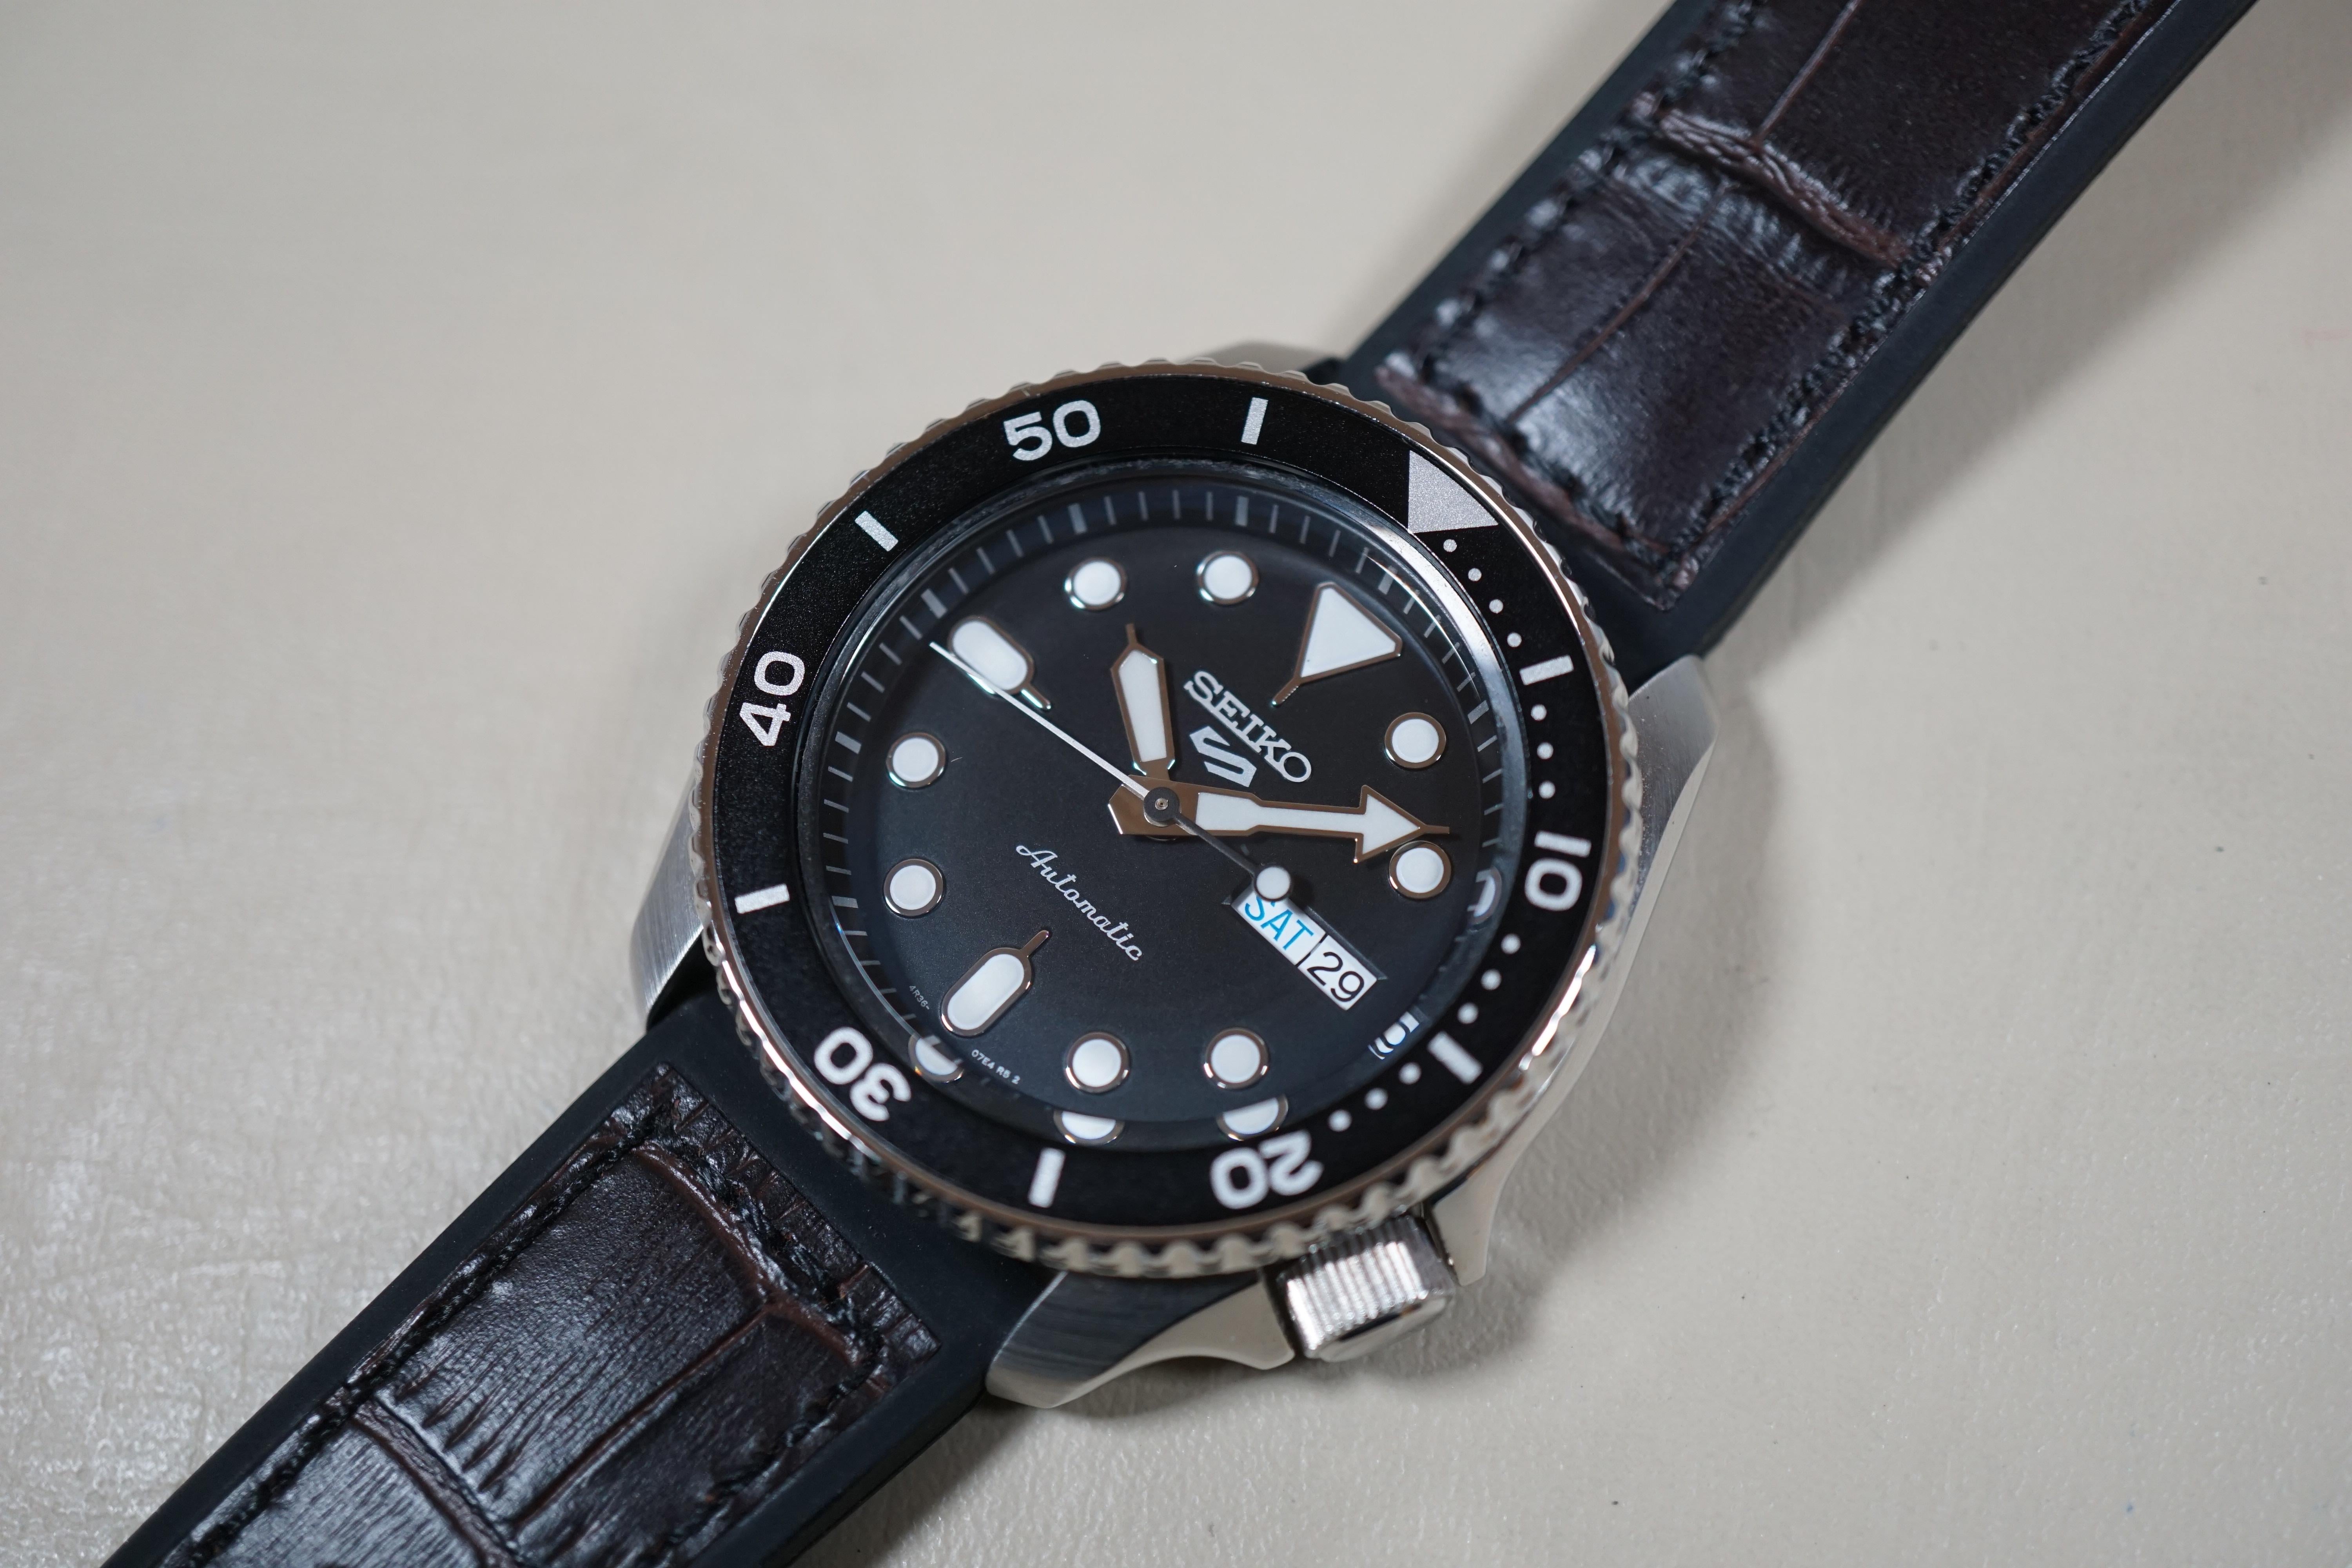 WTS] Seiko 5 Sports SBSA027 4R36 Specialist Style Black Automatic - $165 |  WatchCharts